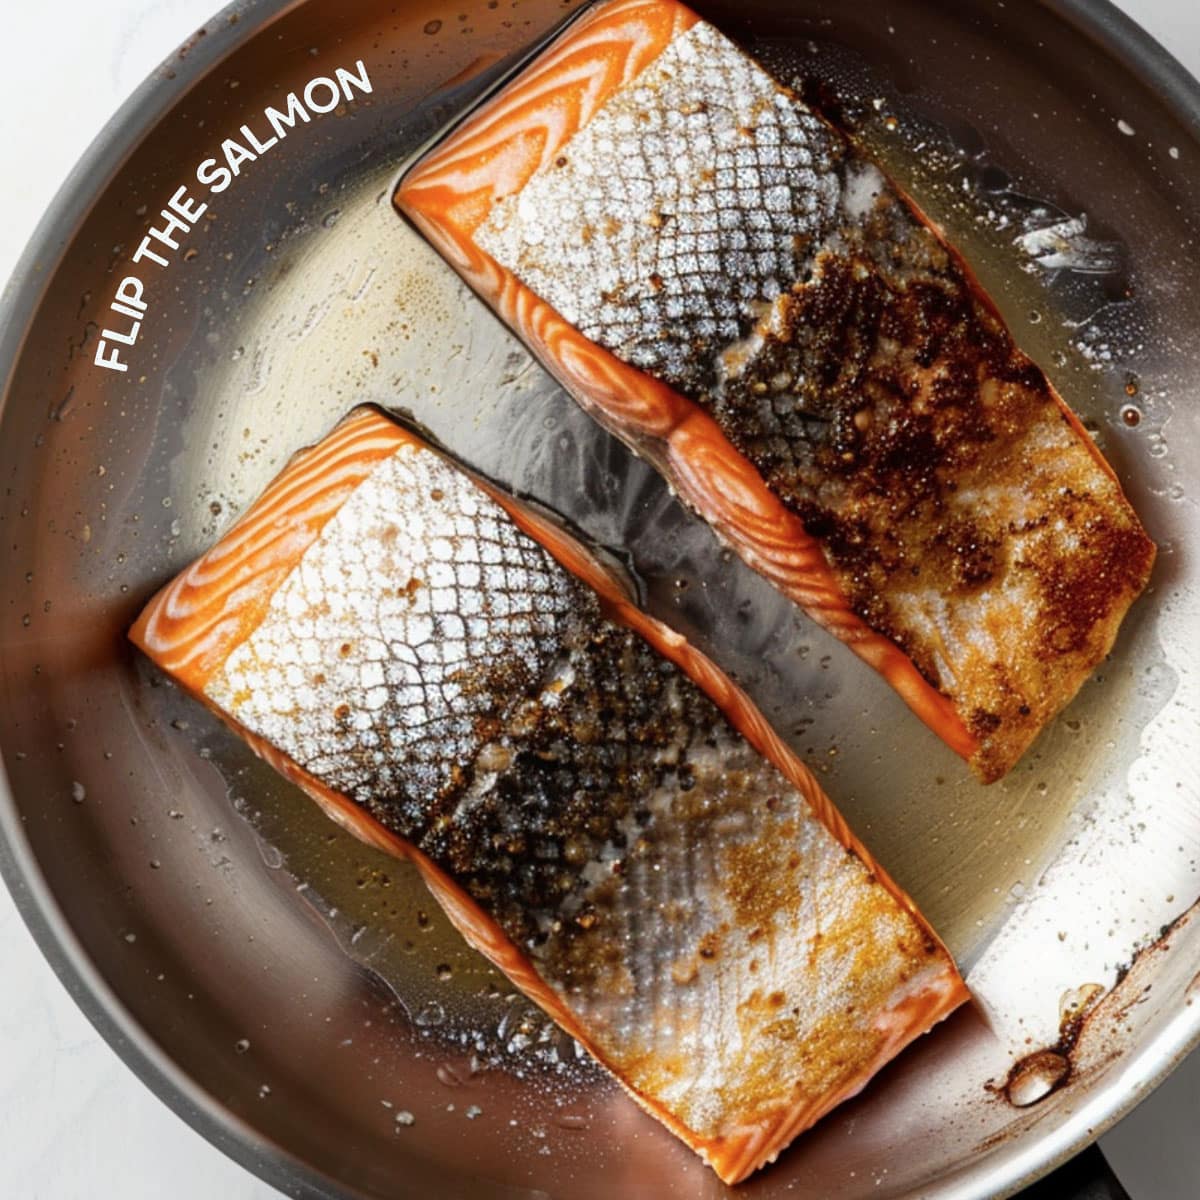 Salmon fillet being flipped in a pan to cook the flesh side.